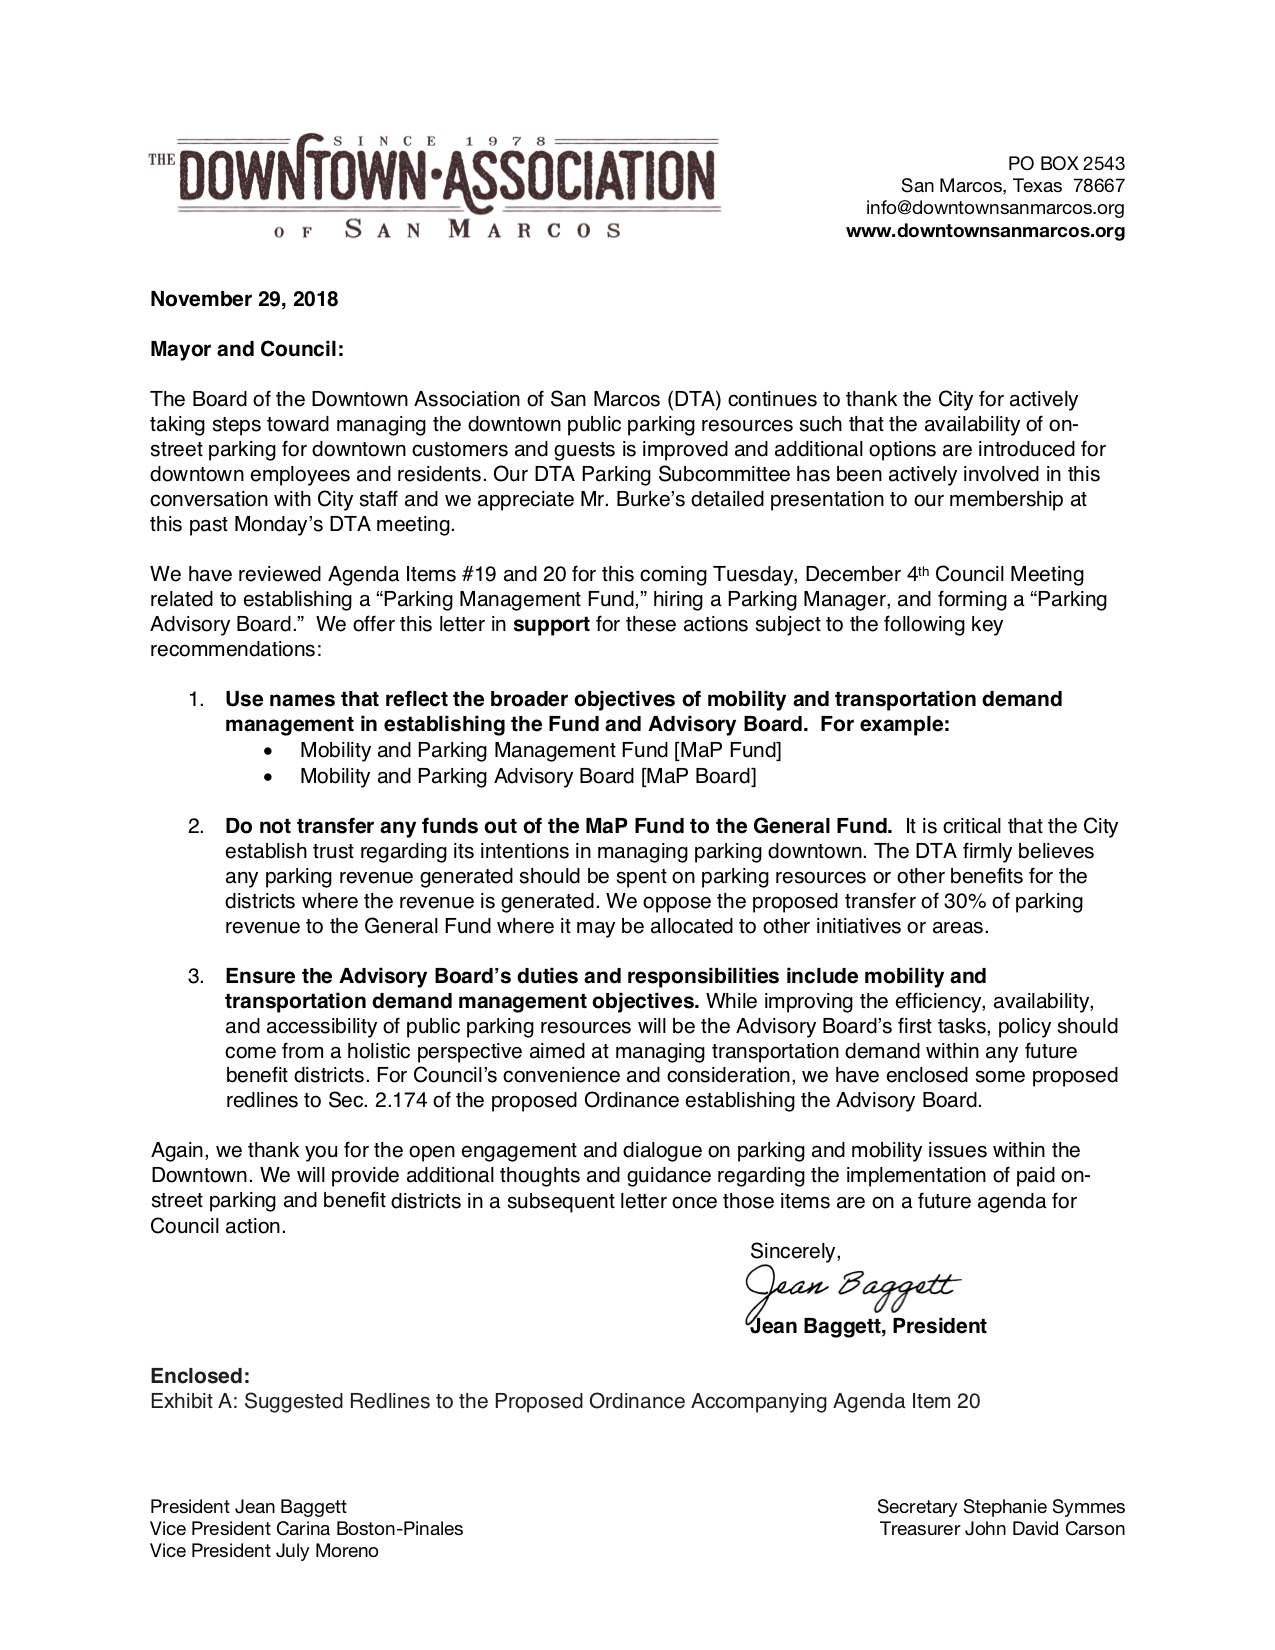 20181130 - Parking Fund Mgr and Board - DTA Letter PG 1.jpg